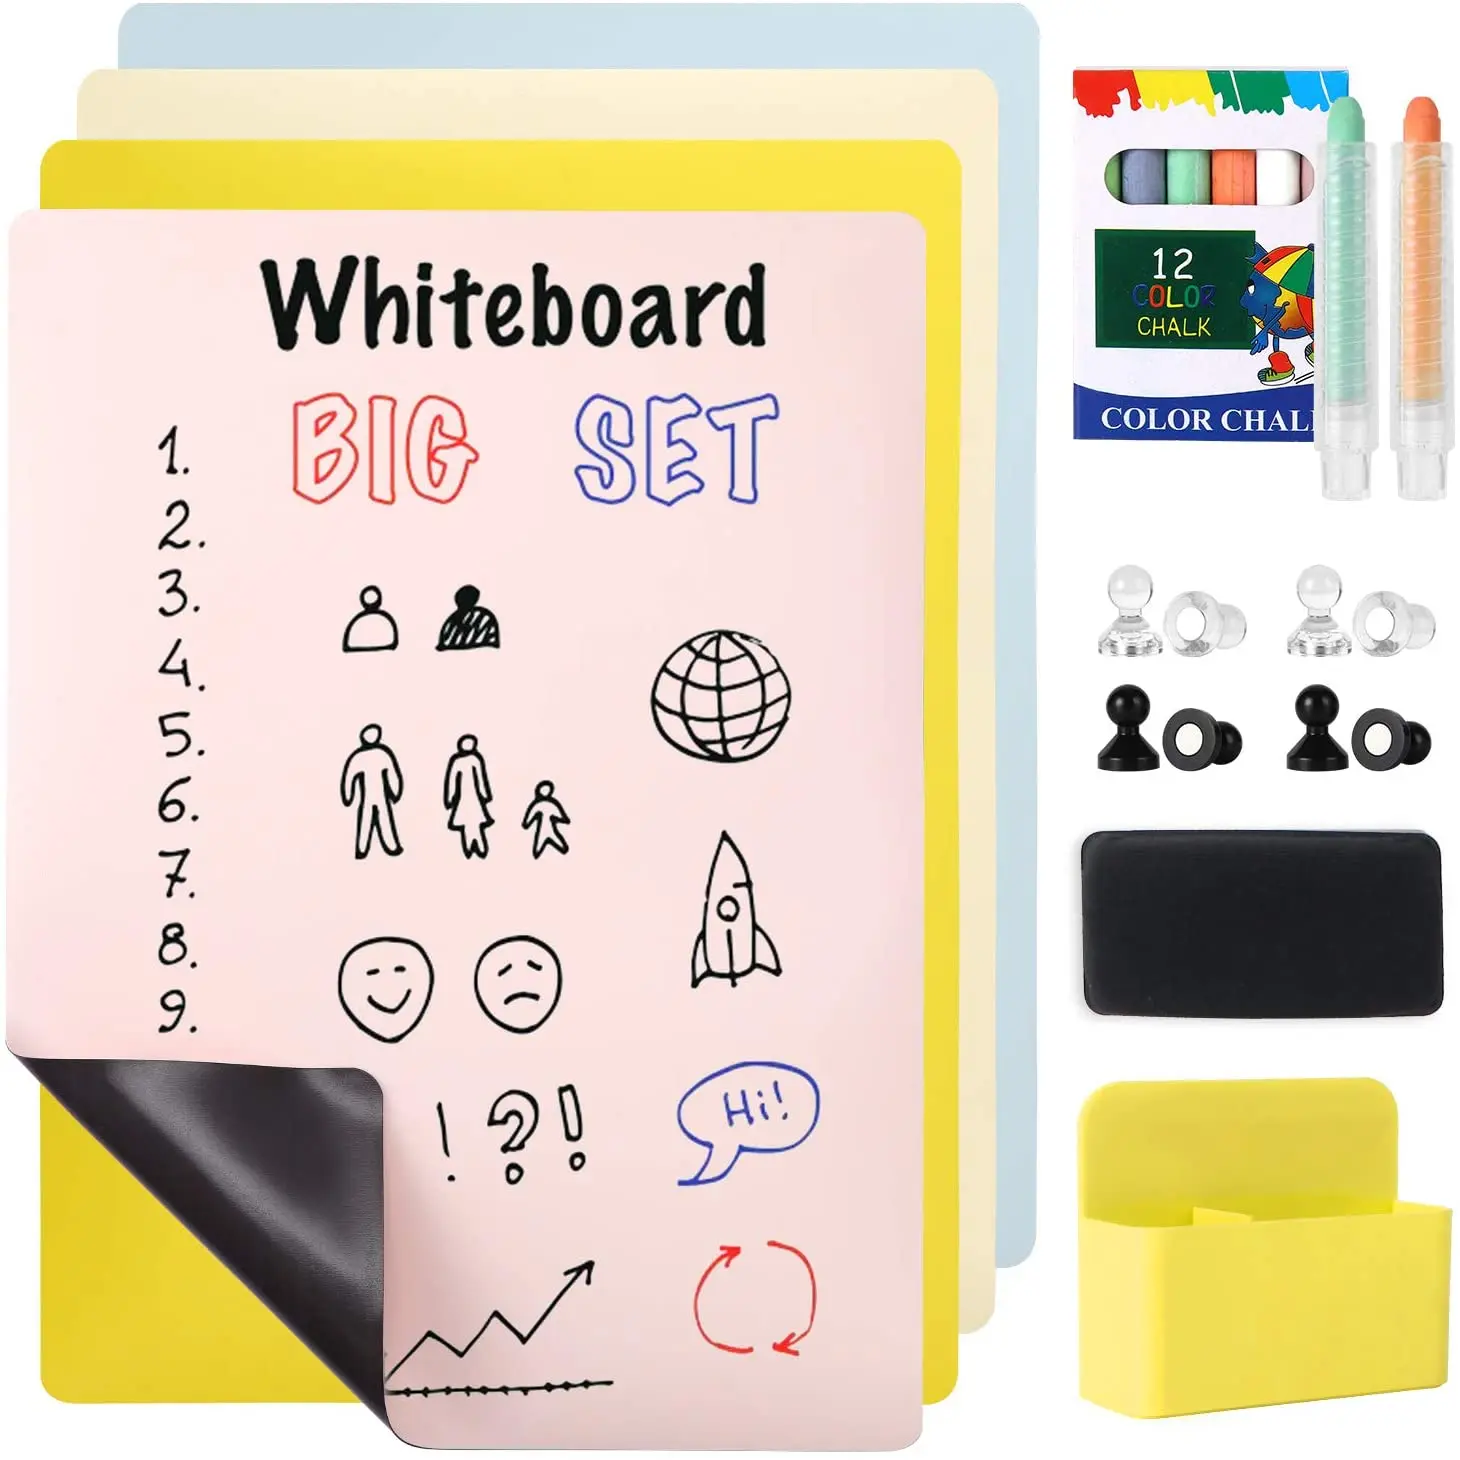 Self Adhesive Magnetic Flexible Chalkboard Wall Wet Erase Decal for Wall -  China Wet Erase Decal, Wet Erase Paper